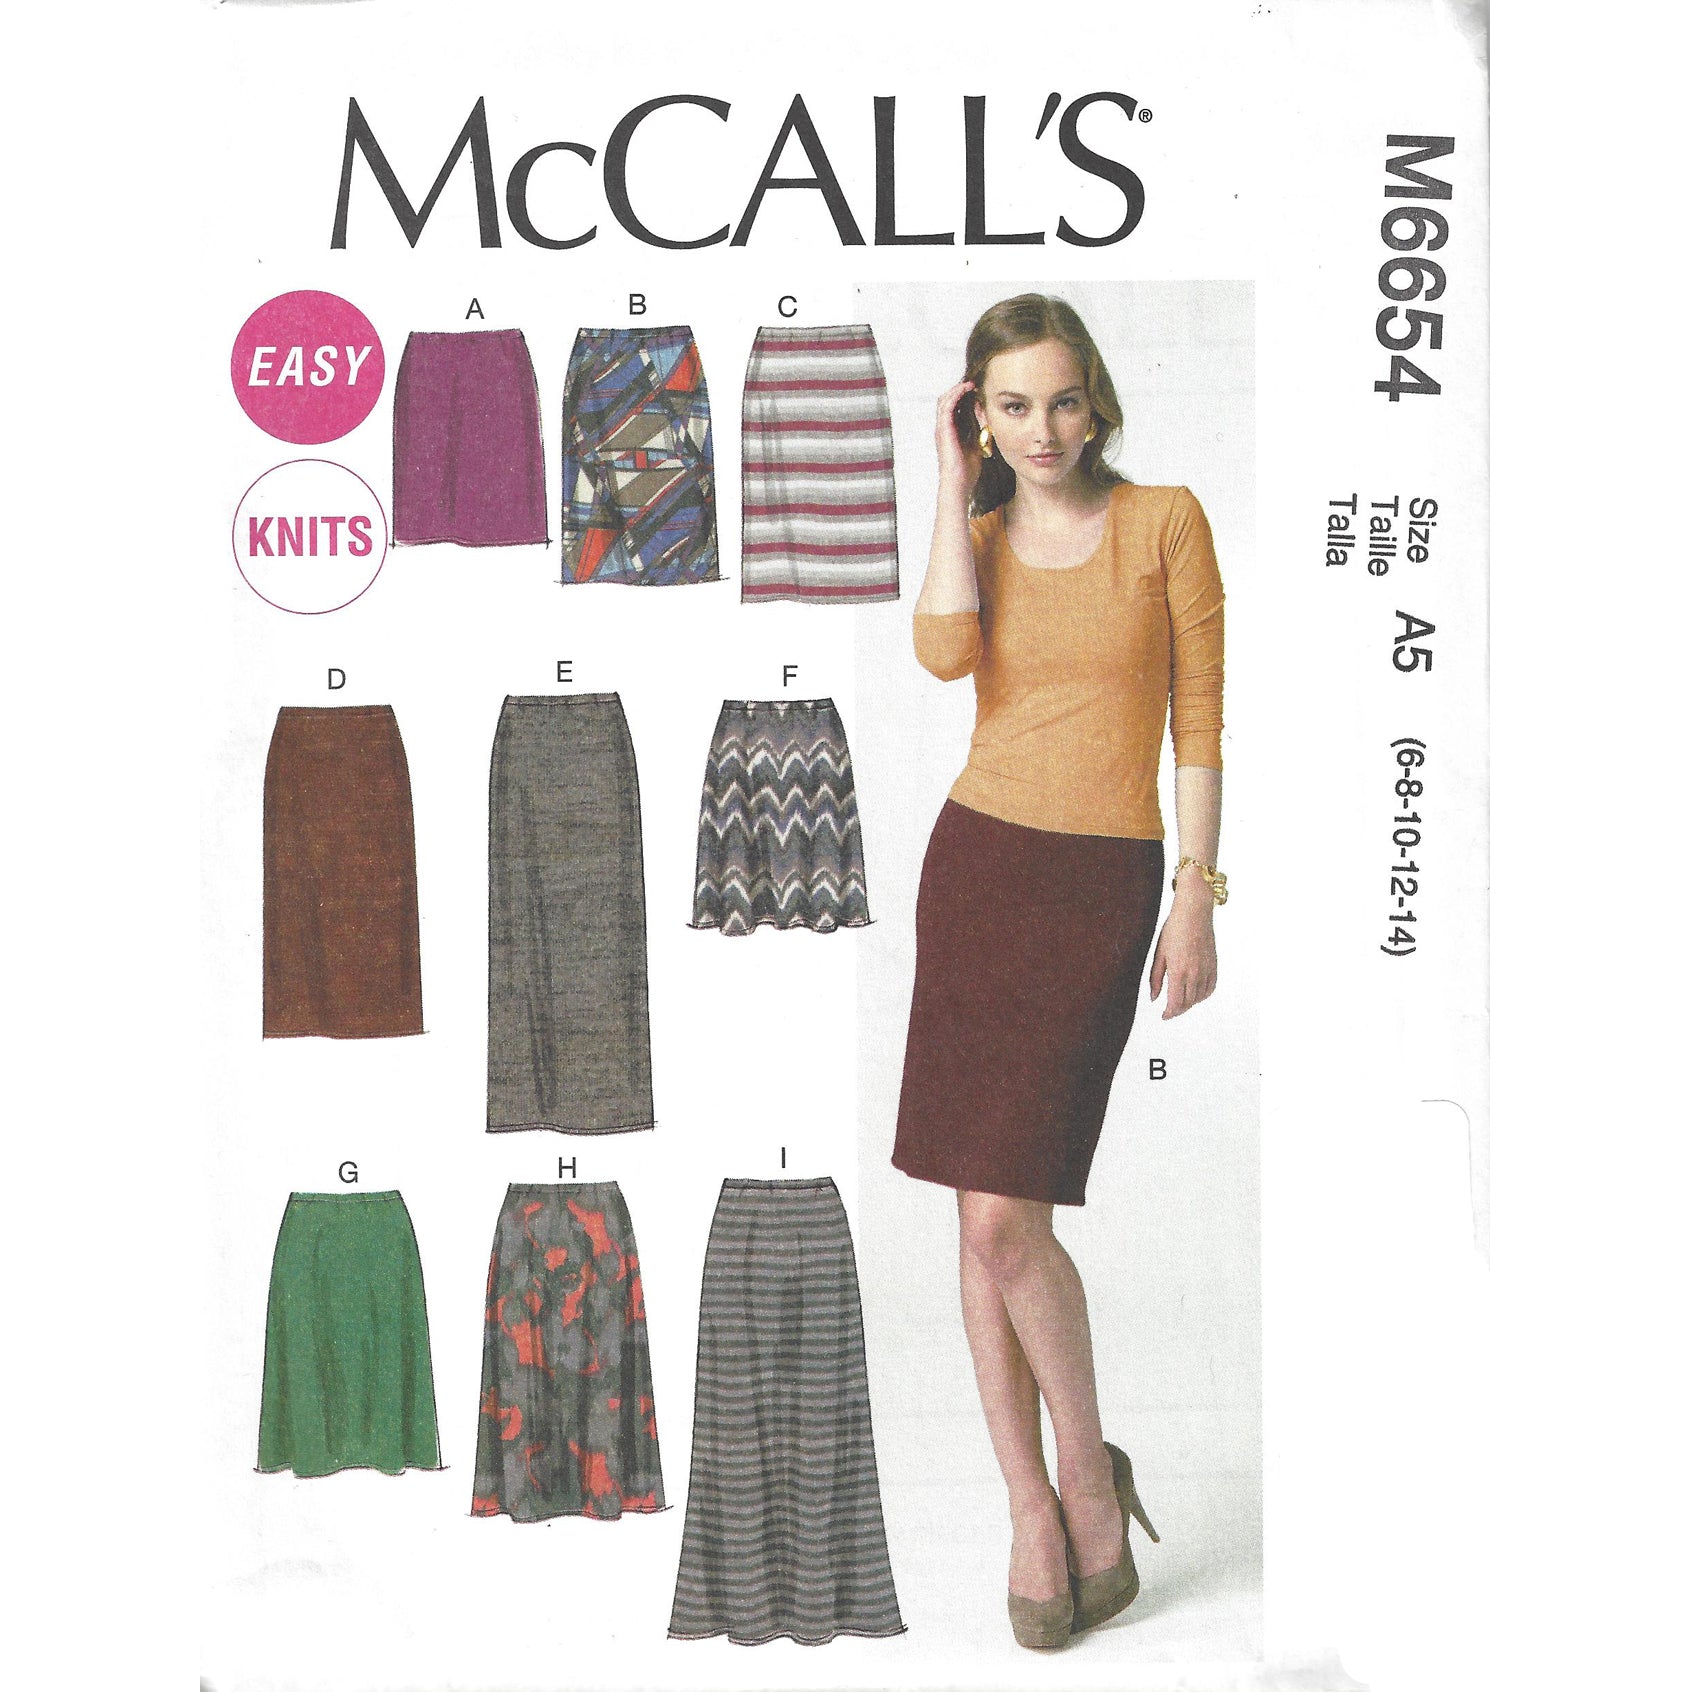 mccalls sewing patterns (4 Pack)